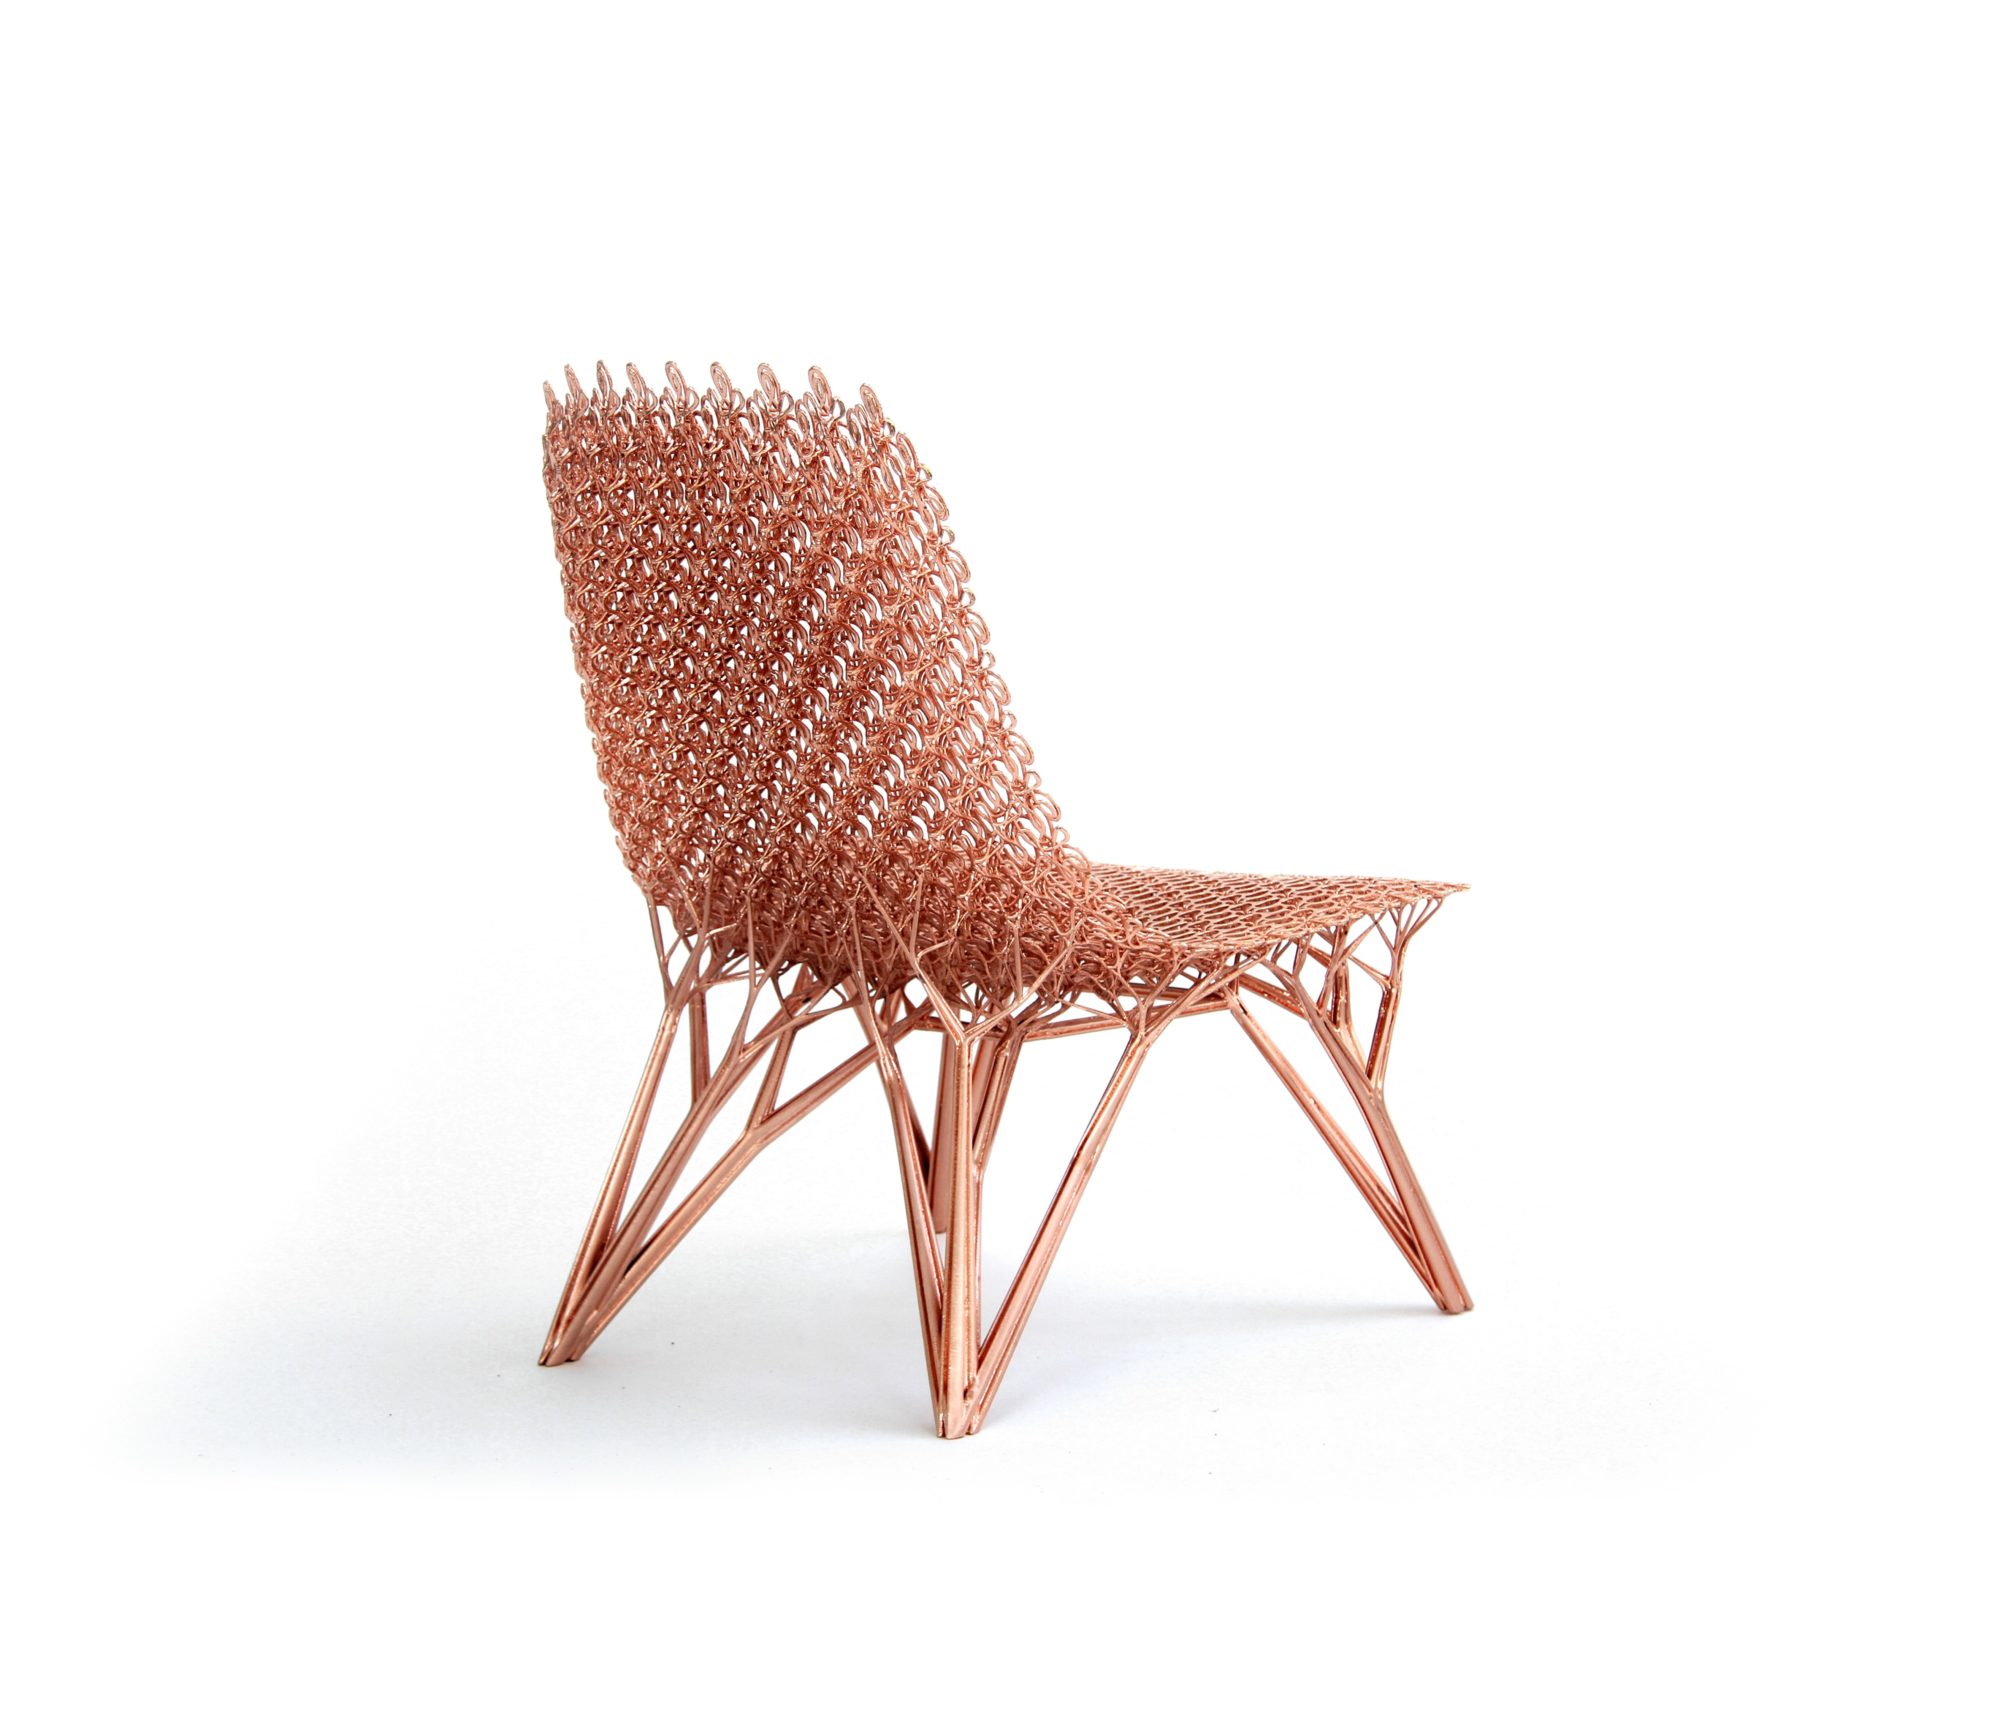 the side of a copper-colored, coil-textured chair with branch-like legs